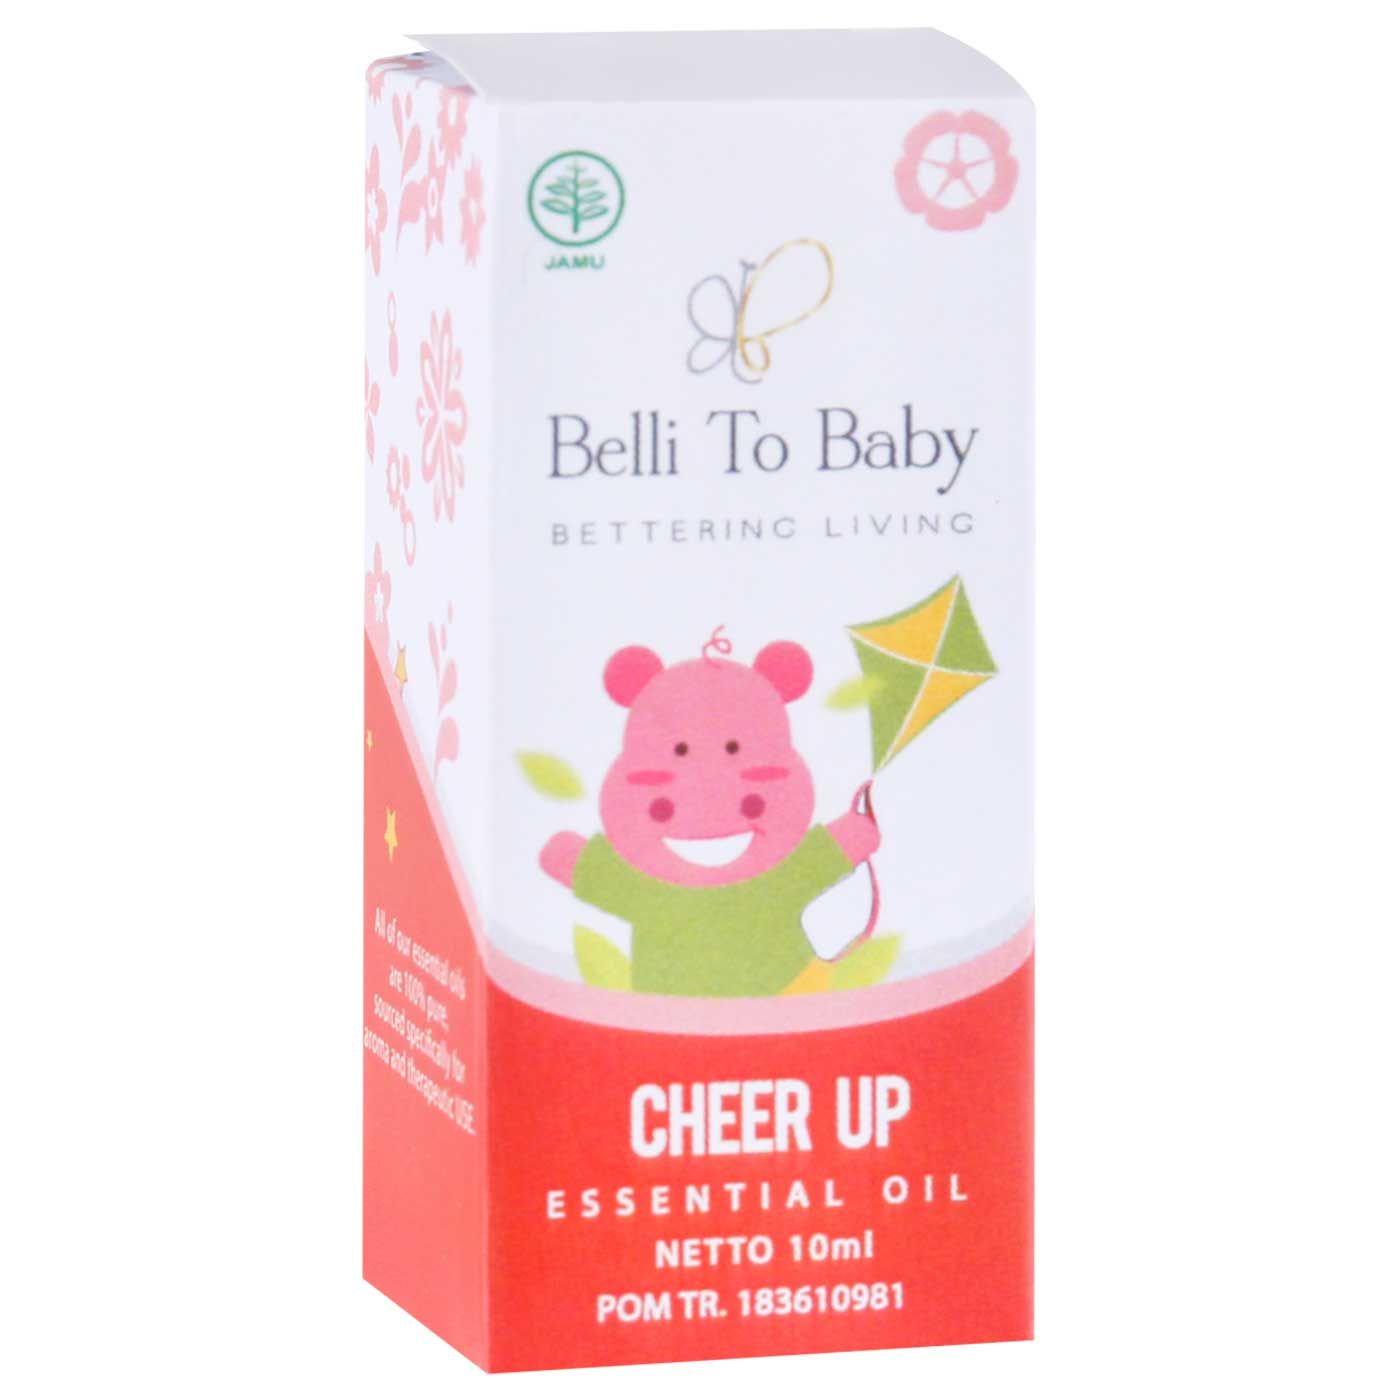 Belli To Baby Essential Oil Cheer Up 10ml - 6